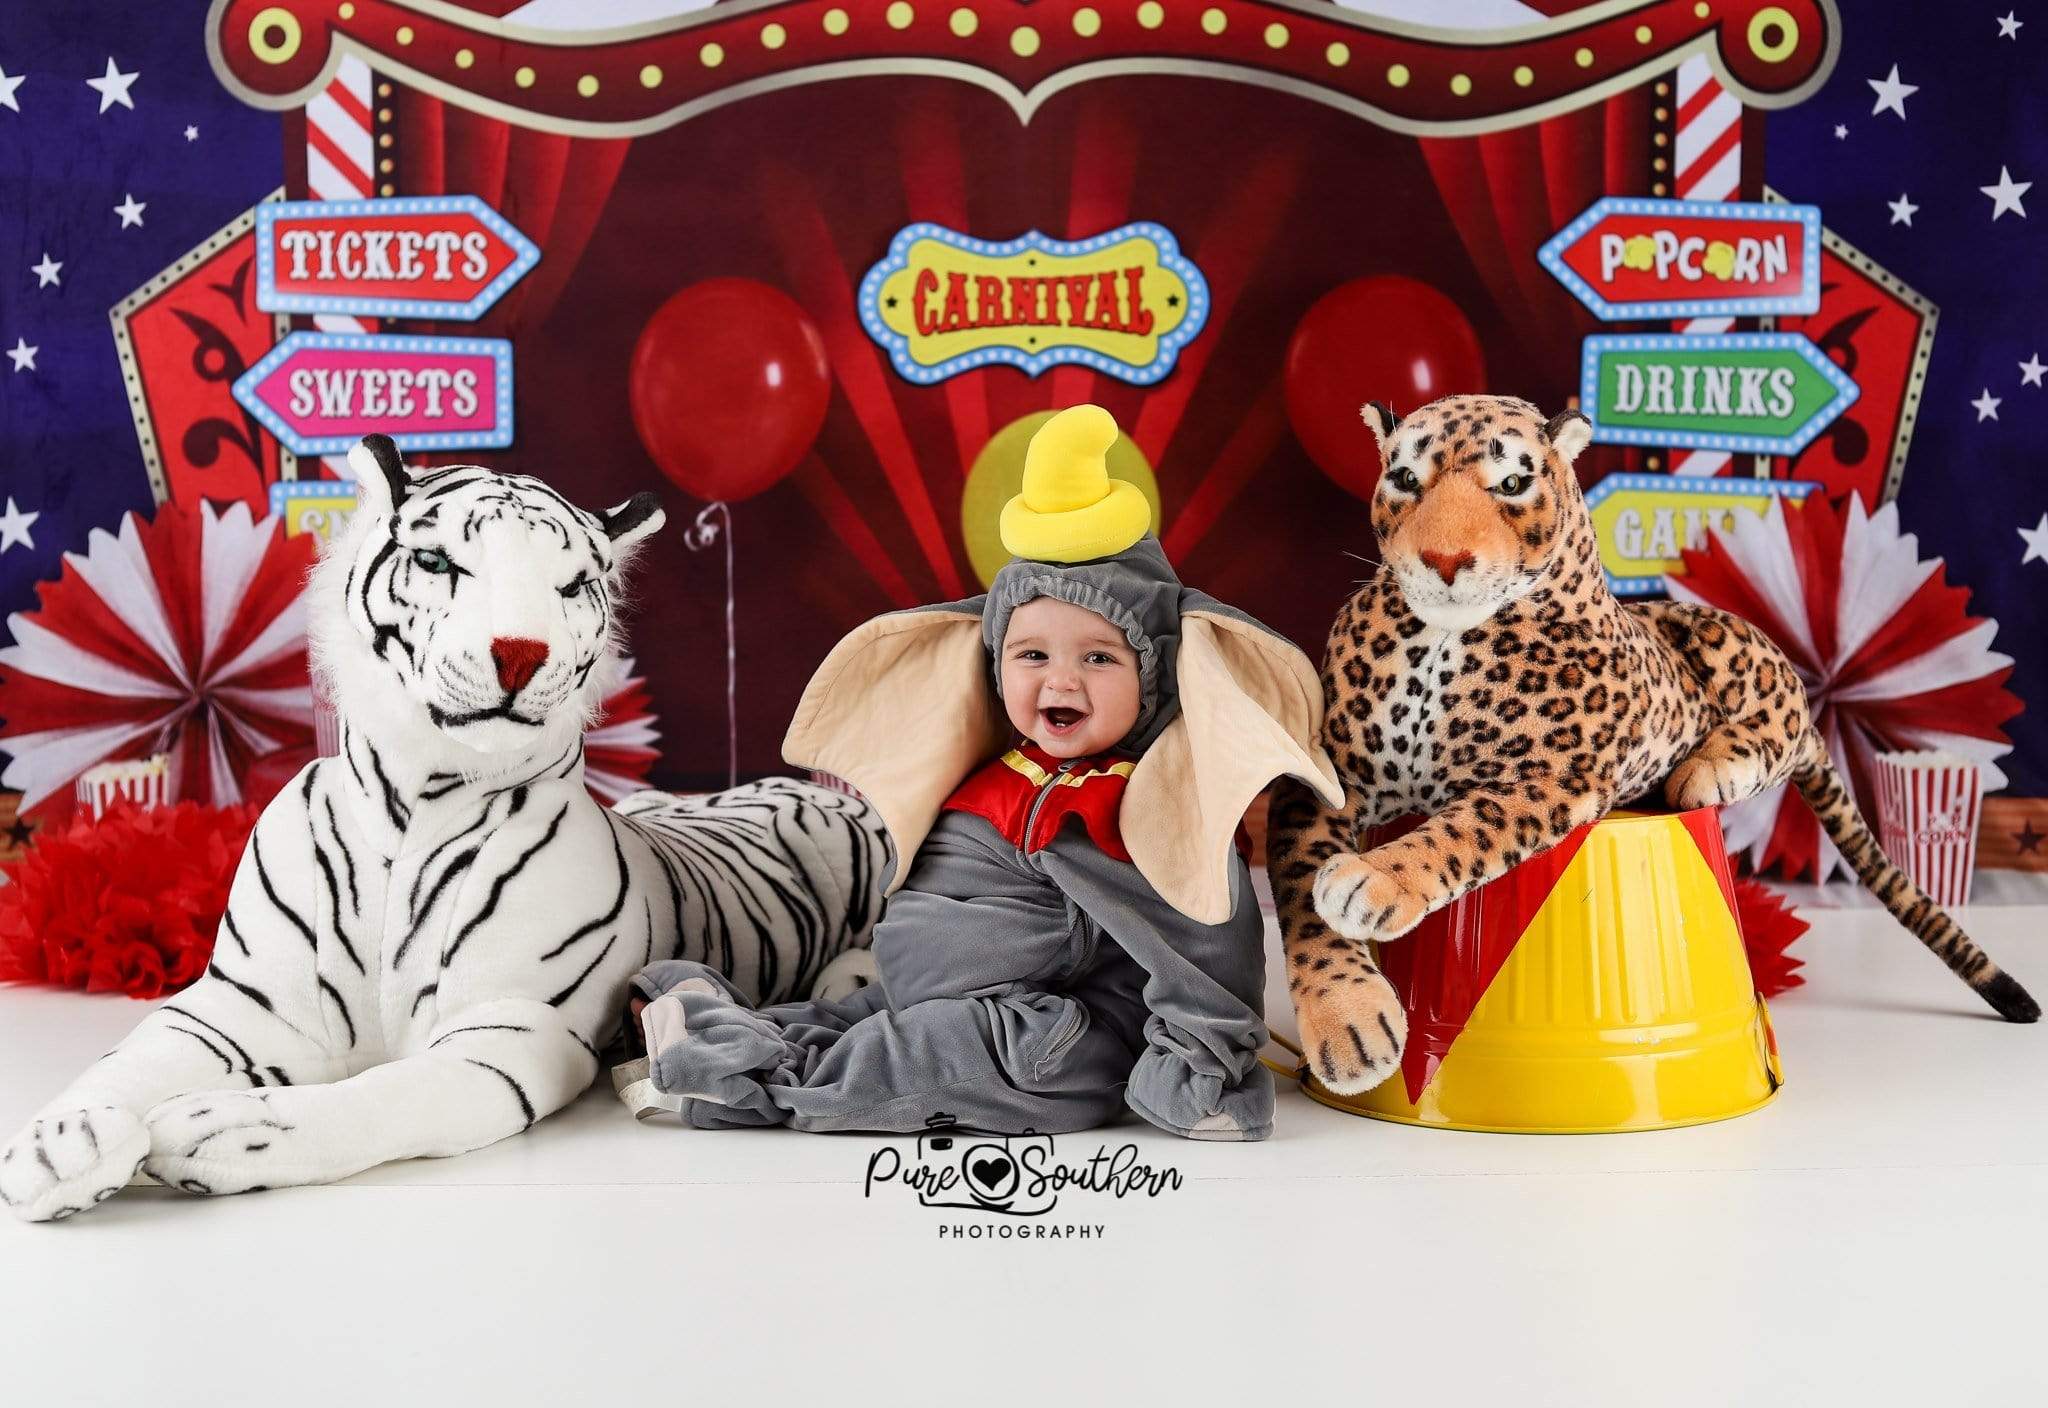 Kate Cake Smash Carnival Backdrop for Photography Designed By Sherie Skelly